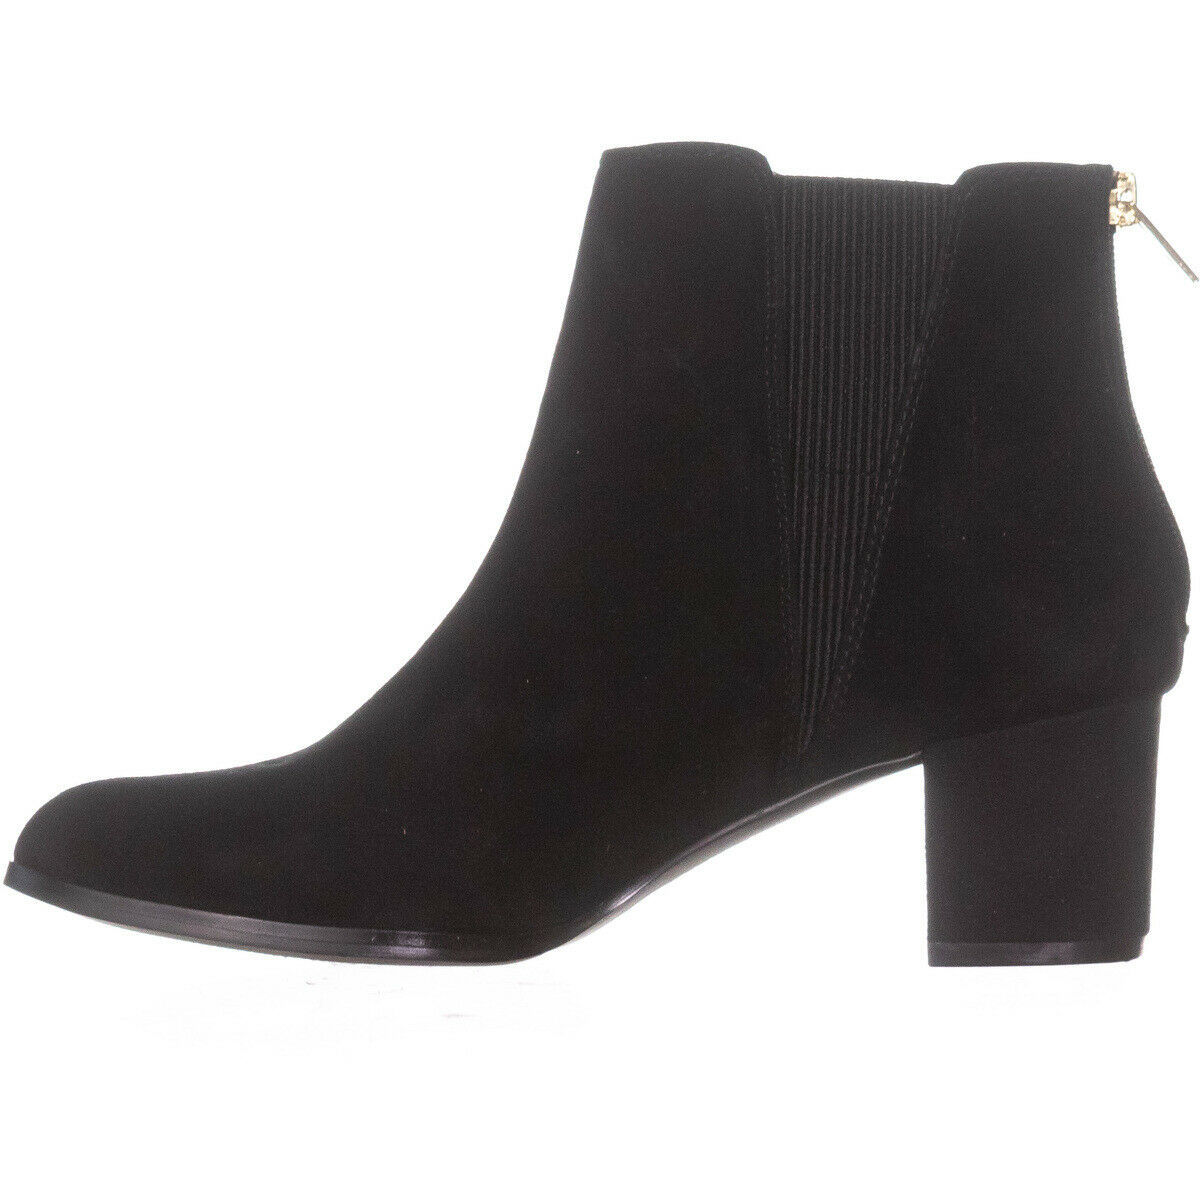 A35 Vitaa Rear Zip Ankle Boots 854, Black, 7.5 US - Boots